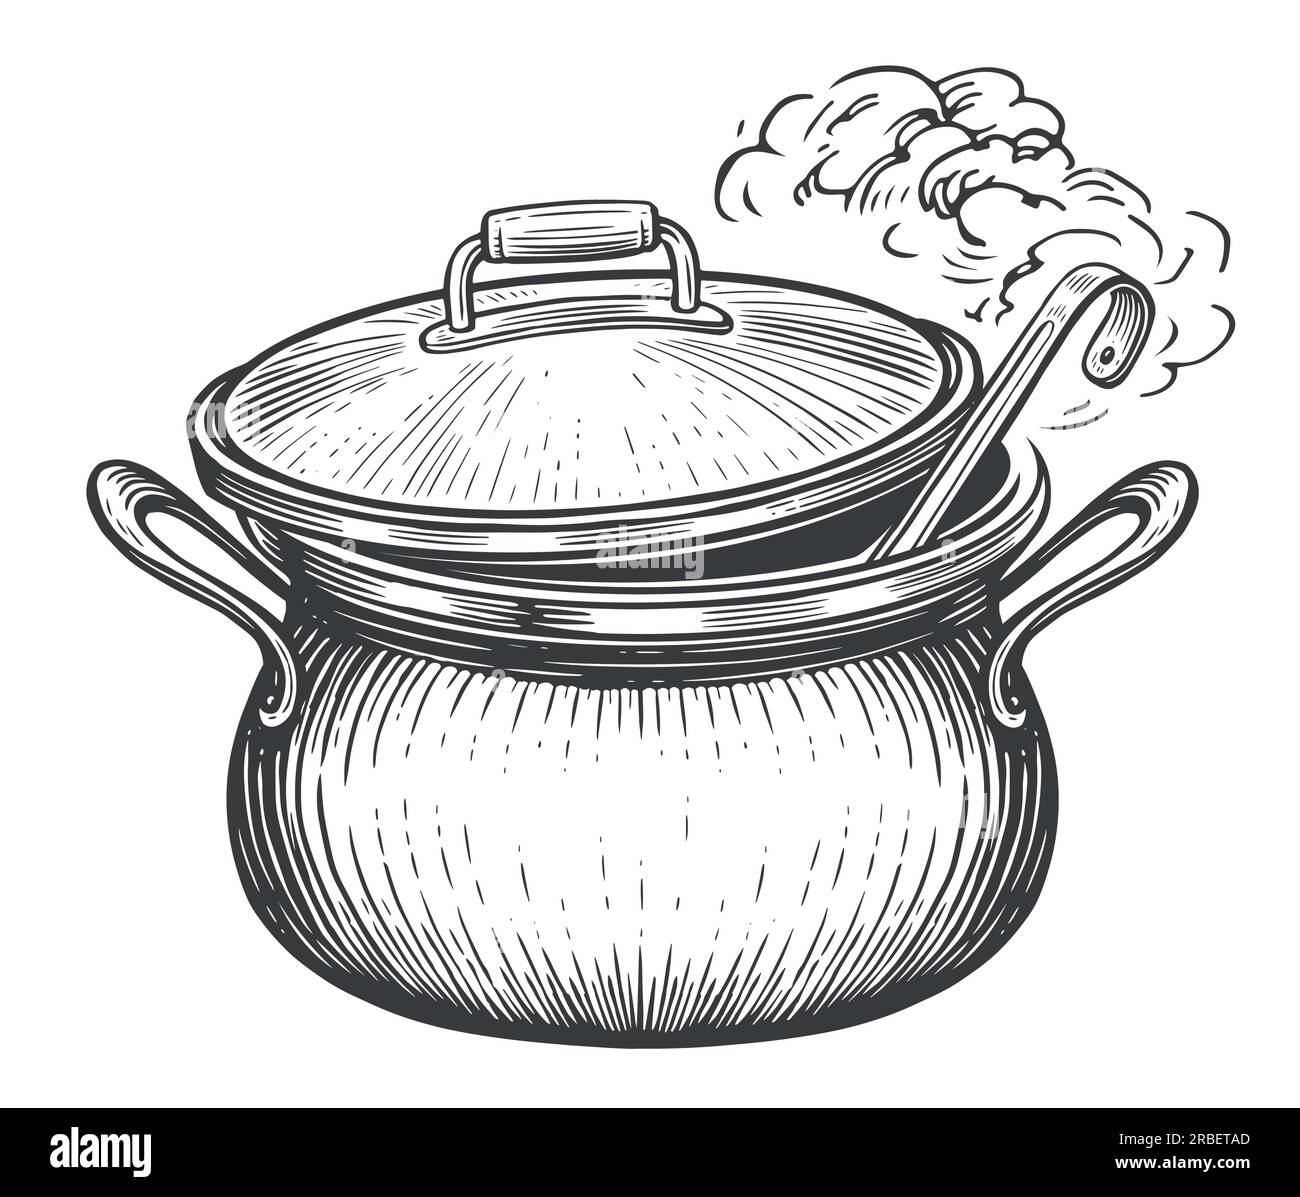 https://c8.alamy.com/comp/2RBETAD/pot-with-cooking-soup-and-ladle-and-lid-food-preparation-in-saucepan-sketch-vector-illustration-2RBETAD.jpg